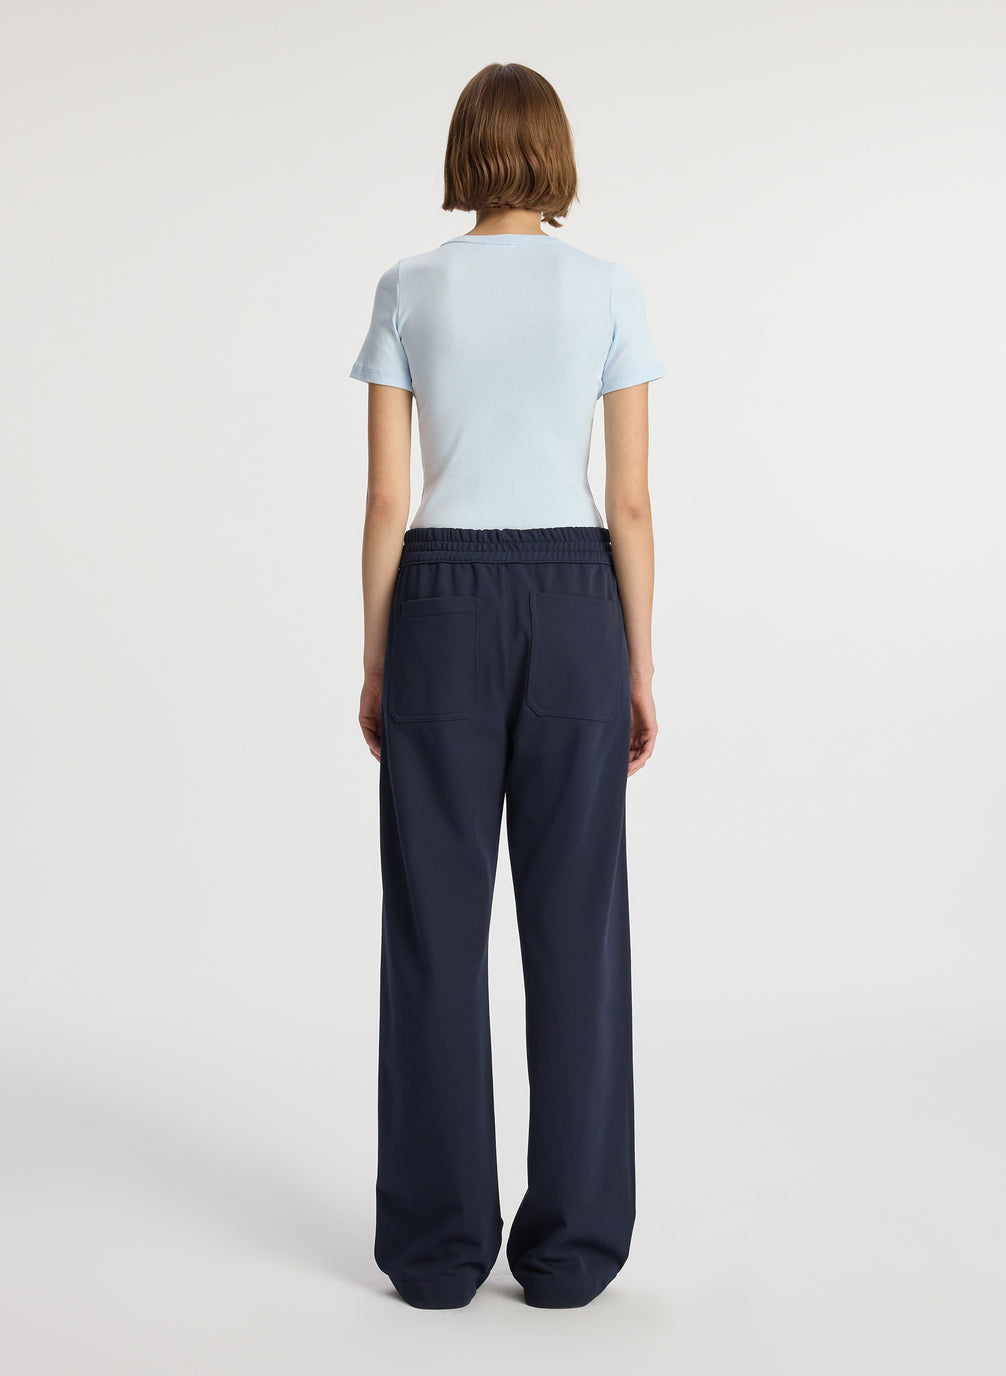 back view of woman wearing light blue tshirt and navy blue pants